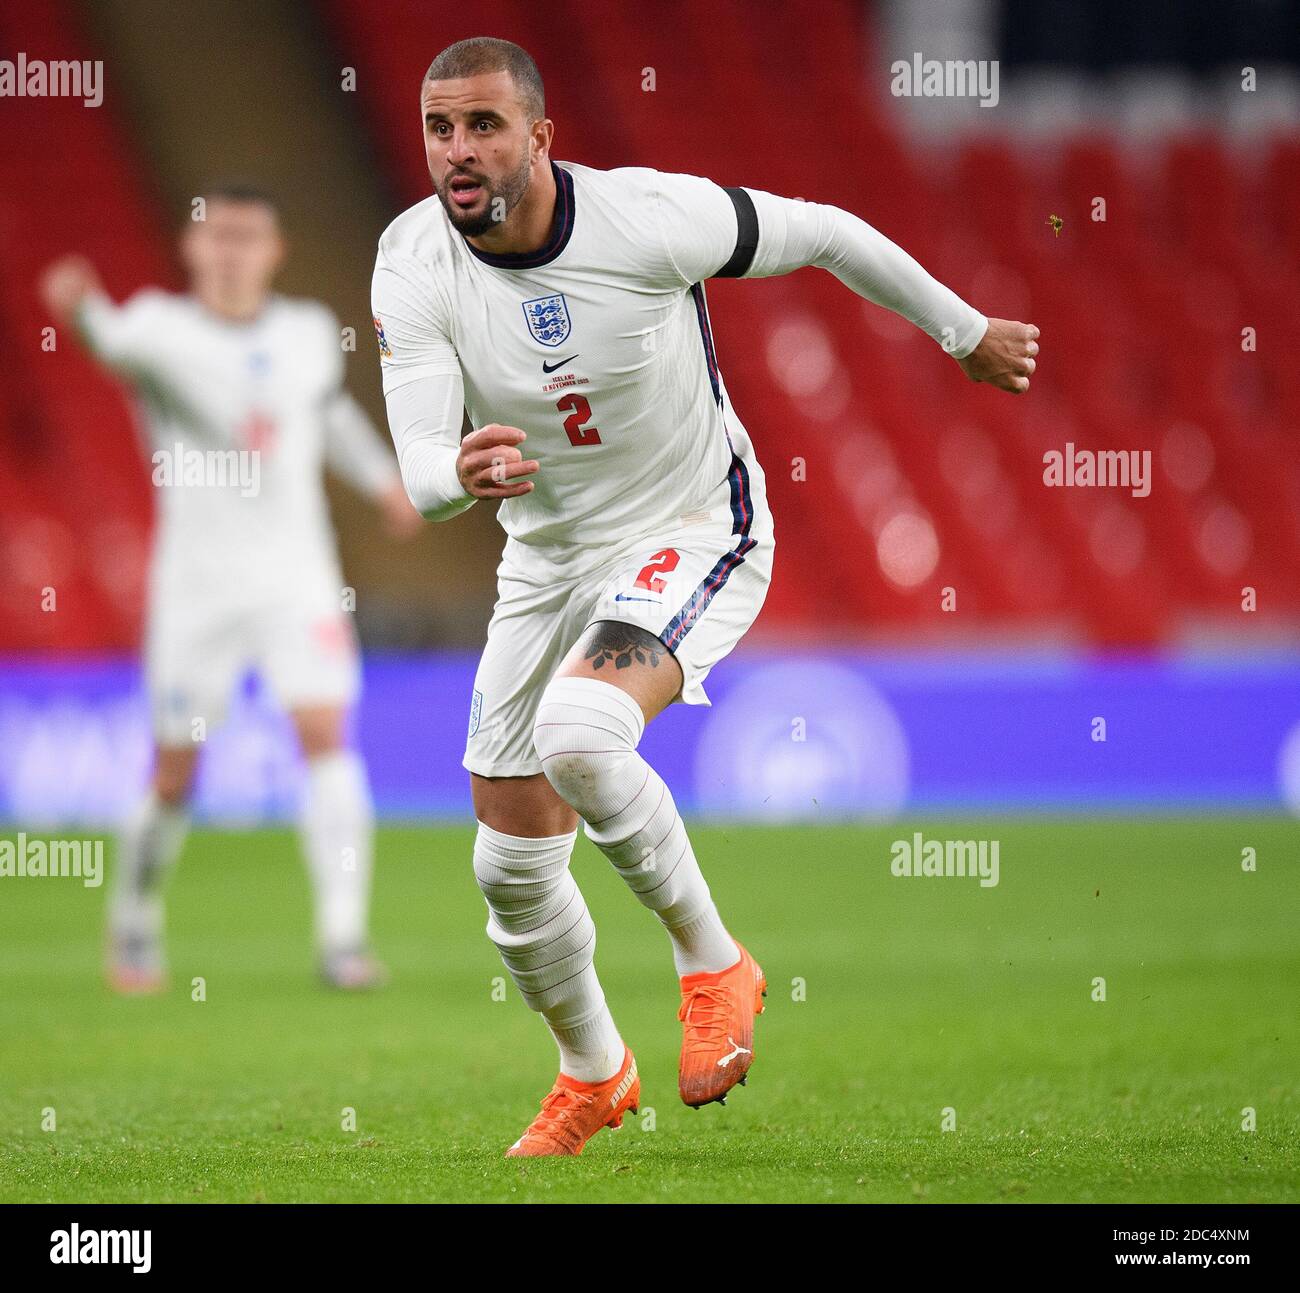 Wembley Stadium, London, 18th Nov 2020.   Engand’s Kyle Walker  England v Iceland - UEFA Nations League - Group A2 - Wembley Picture Credit : © Mark Pain / Alamy Live News Stock Photo